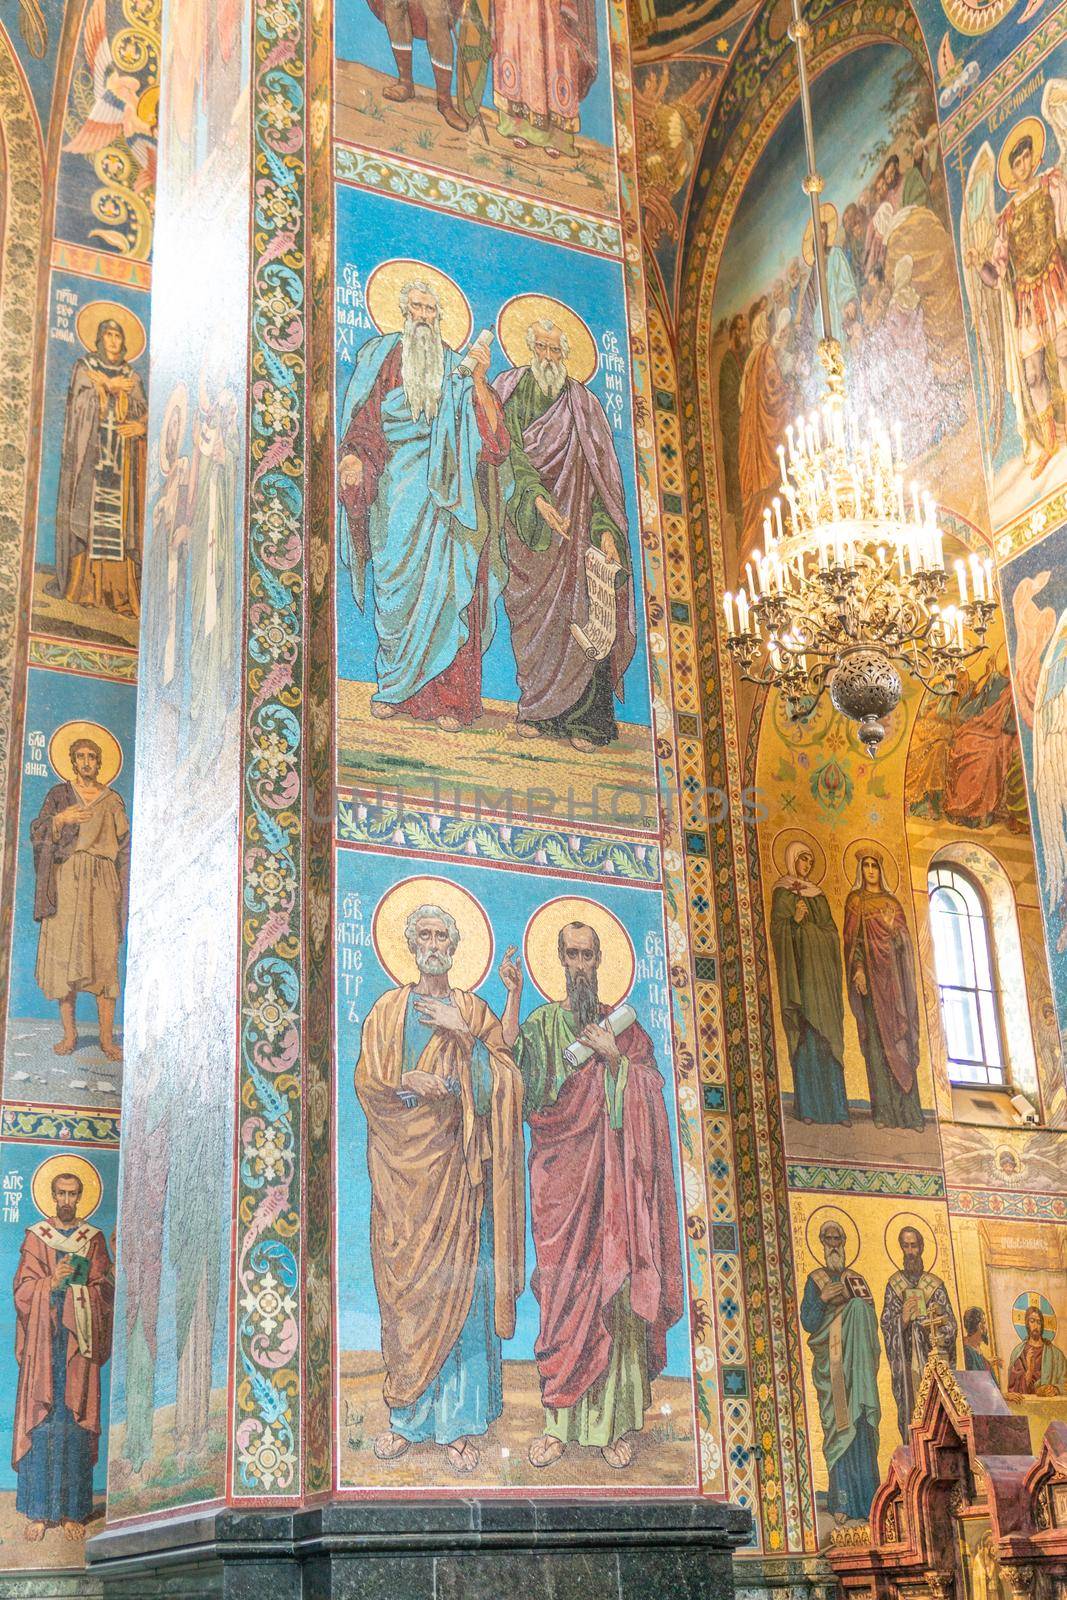 RUSSIA, PETERSBURG - AUG 21, 2022: petersburg christ church russia saint russian building st icon, from jesus krovi for famous for religion culture, dome vault. Old st columns,